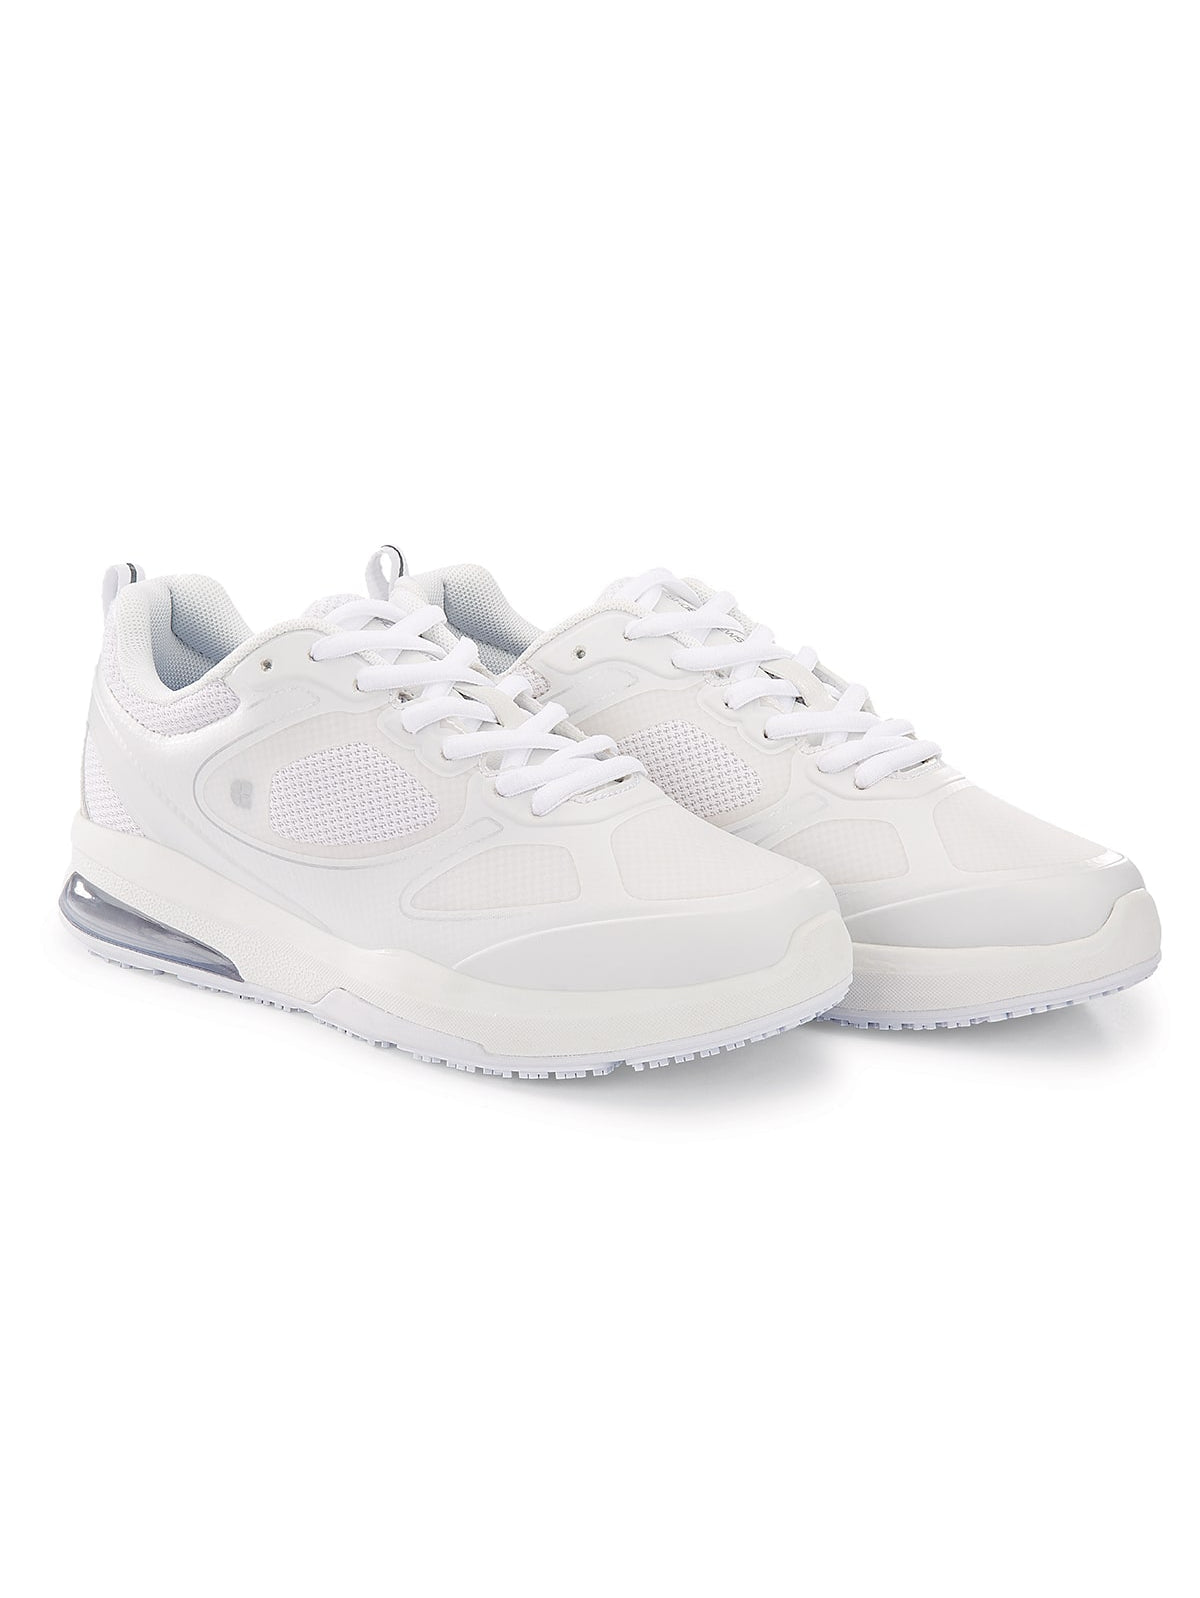 Men's Work Shoe Evolution II White by Shoes For Crews -  ChefsCotton